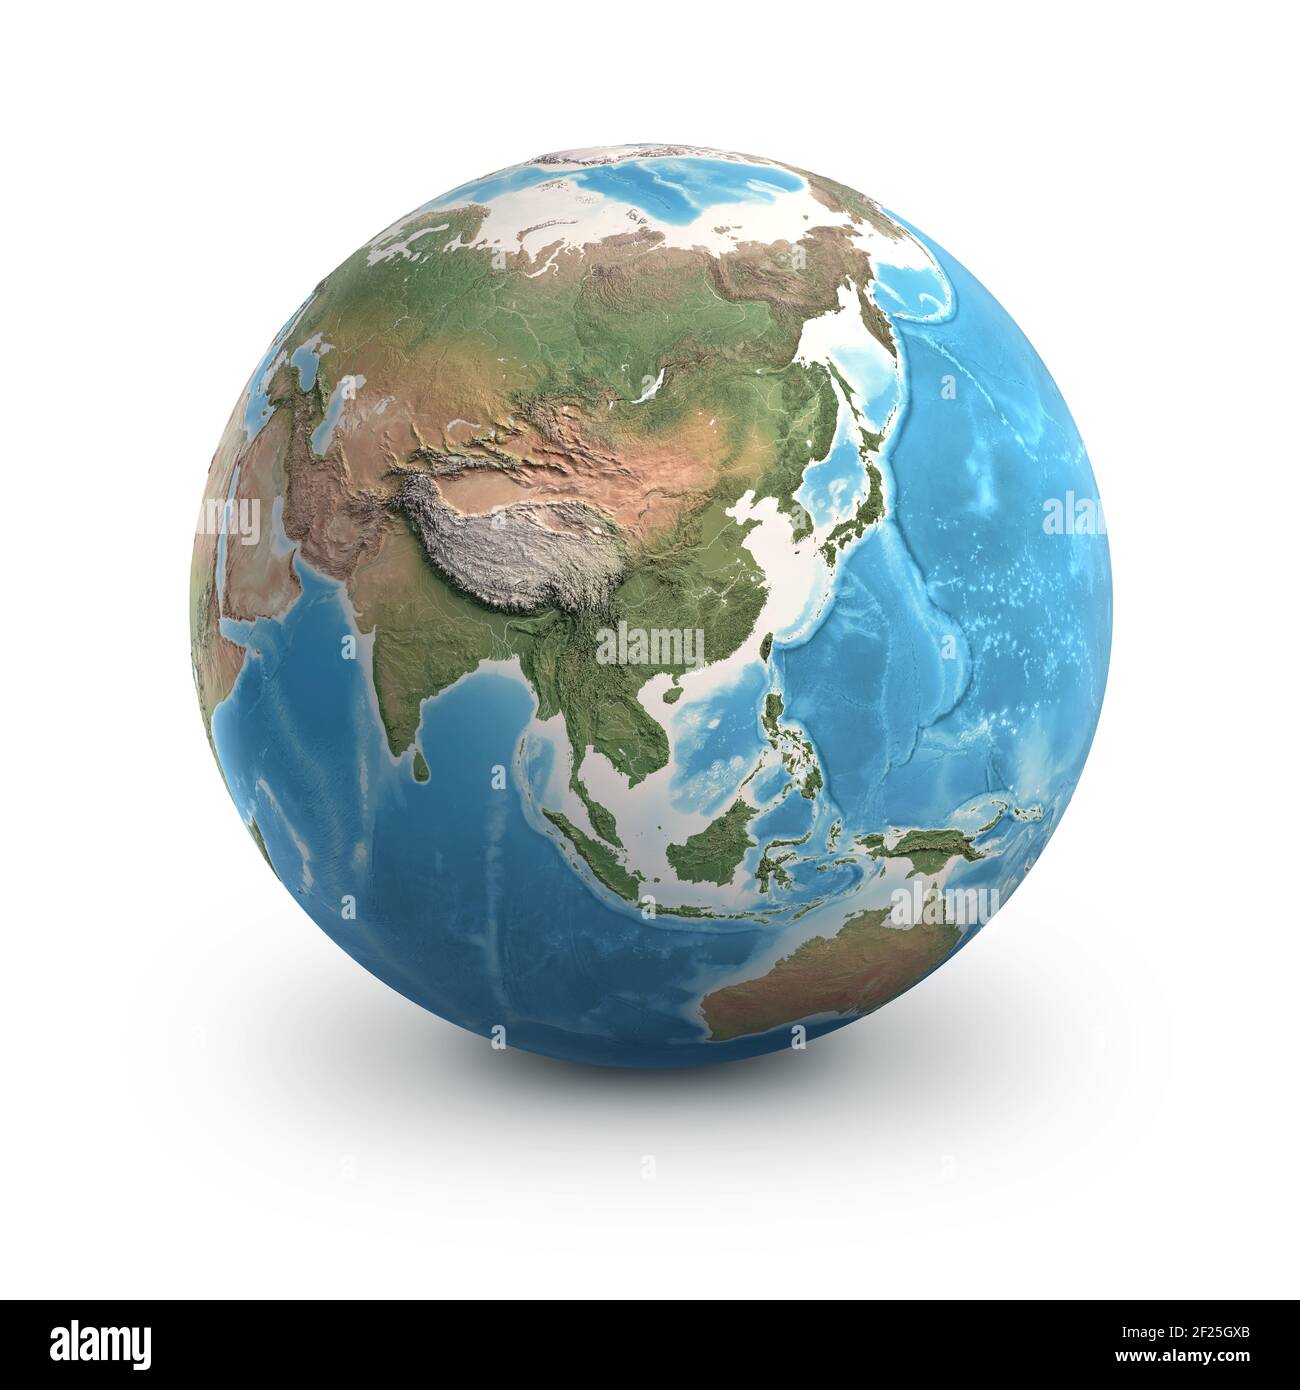 Planet Earth globe, isolated on white. Geography of the world from space, focused on Asia - 3D illustration, elements of this image furnished by NASA. Stock Photo